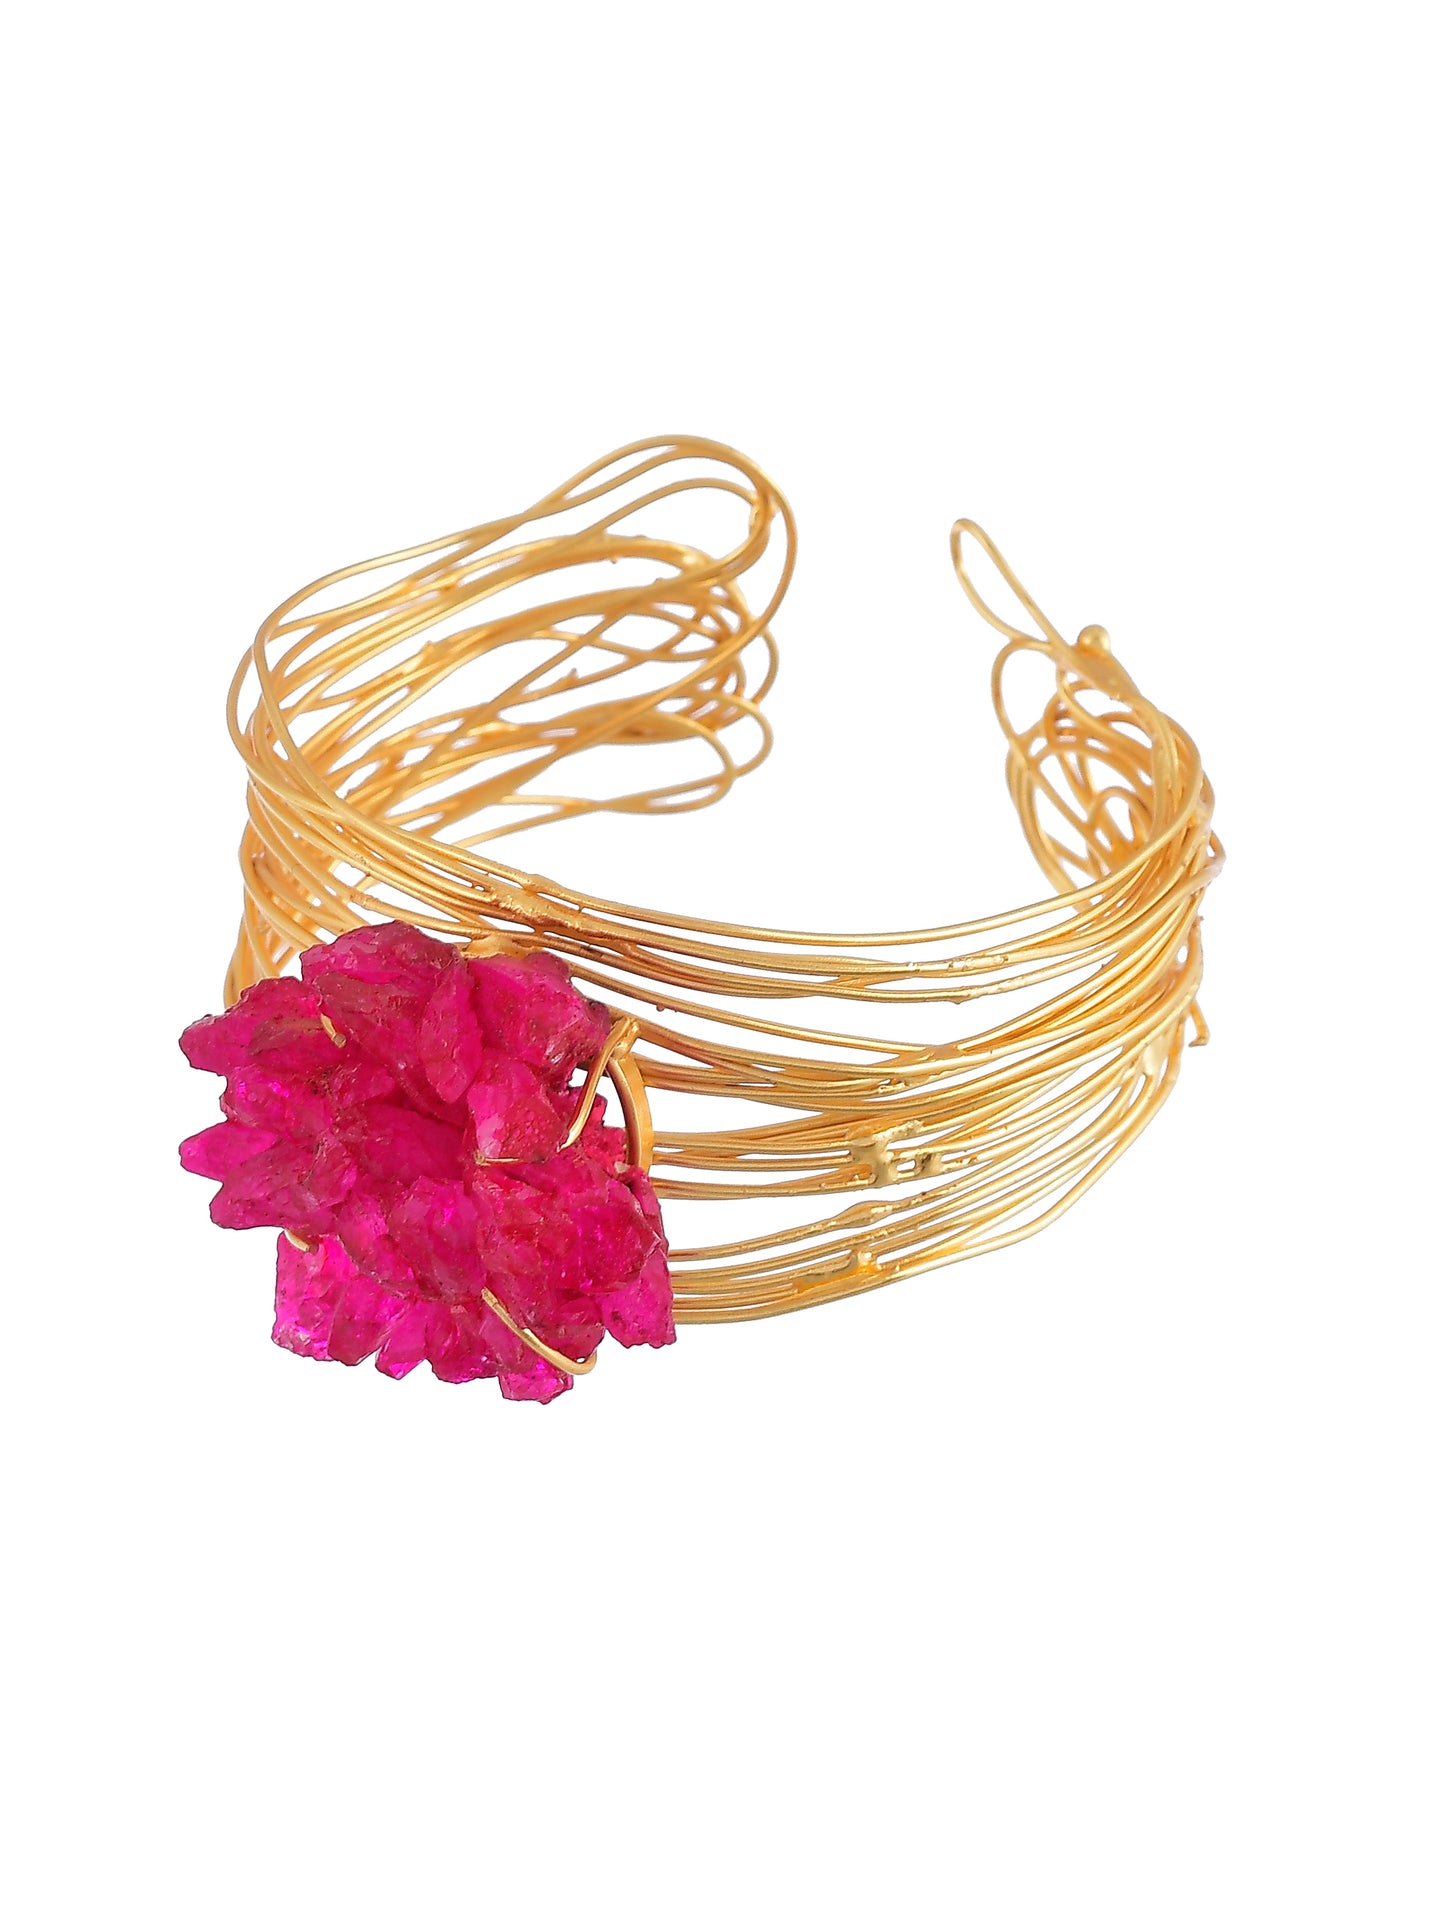 Mesh Wire Rose Gold Plated bracelet